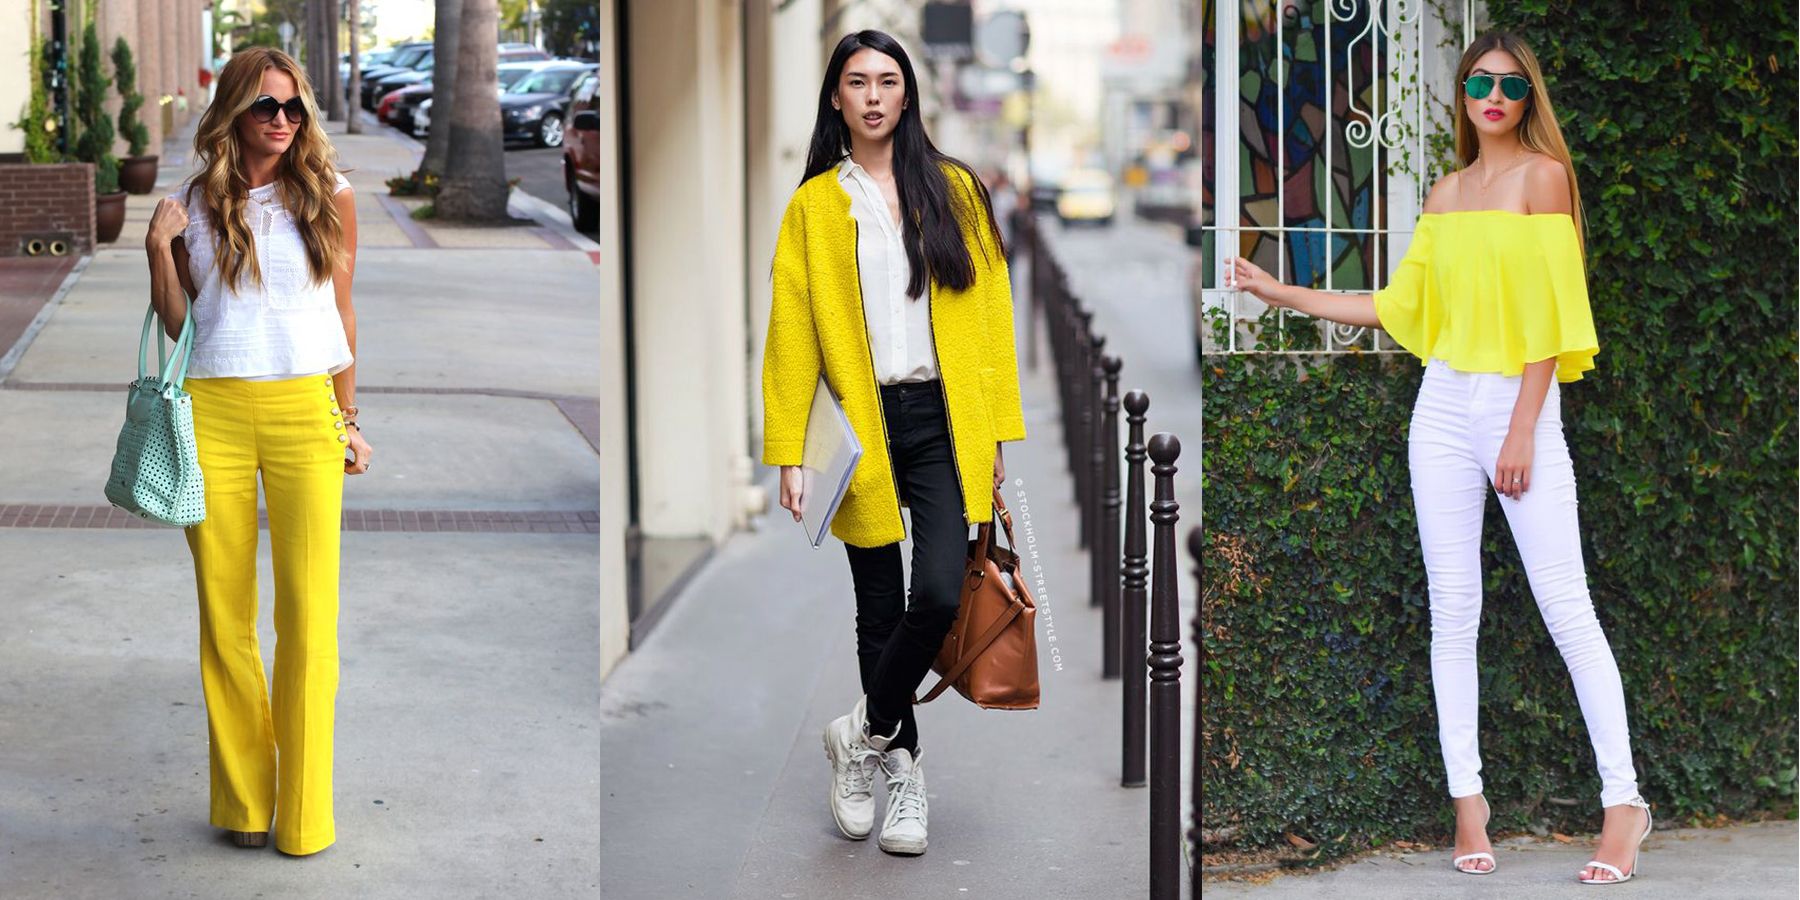 More Fresh and Fashionable with a Touch of Strong Yellow!